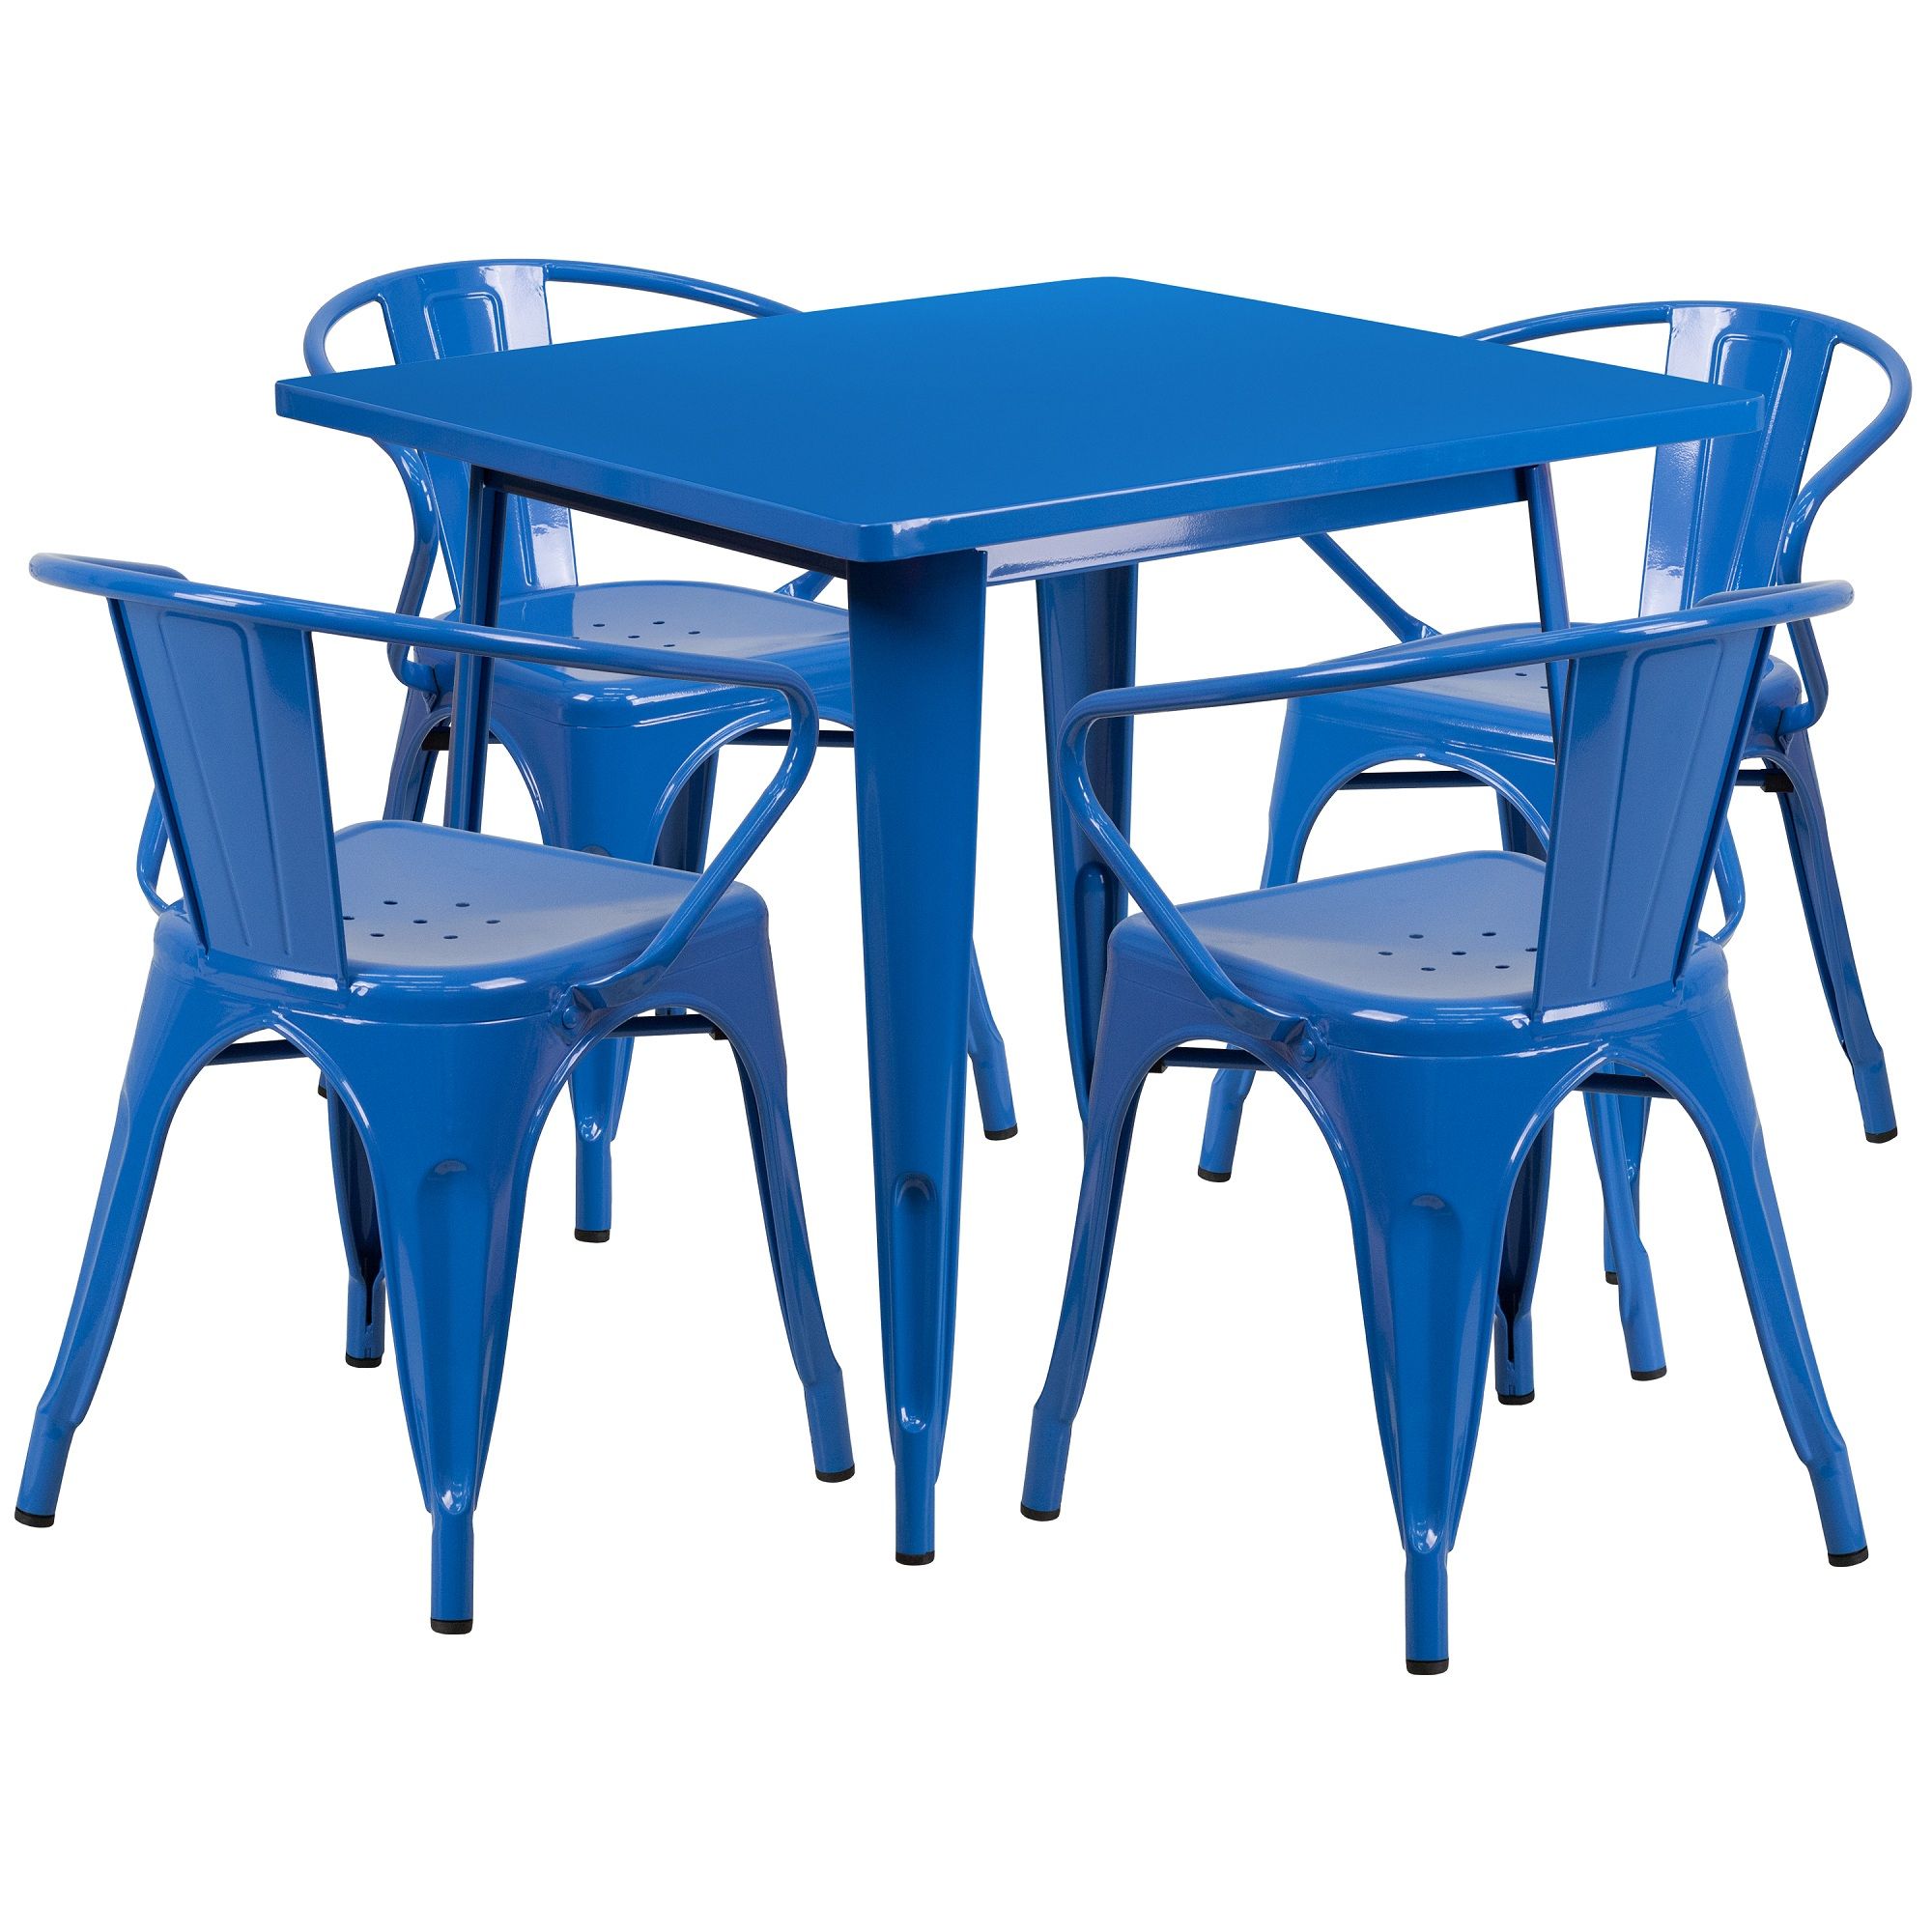 Set Of 5 Blue Square Metal Indoor Outdoor Table With Arm Chair  (View 12 of 15)